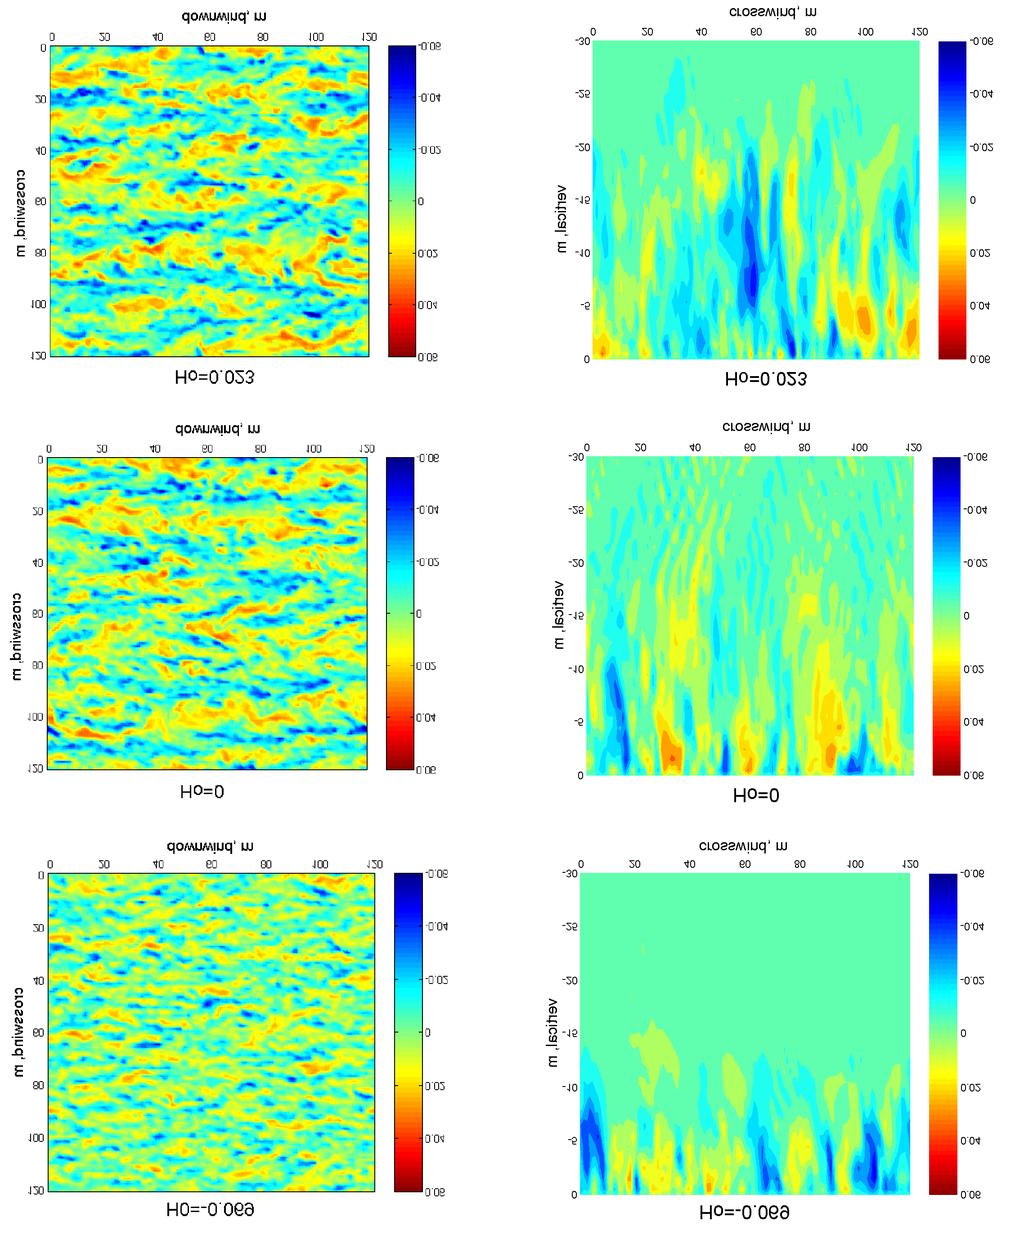 Figure 1. LES simulations of Langmuir turbulence with different combinations of surface heat fluxes. The middle row corresponds to Langmuir turbulence at a moderate wind speed of 8 ms -1.